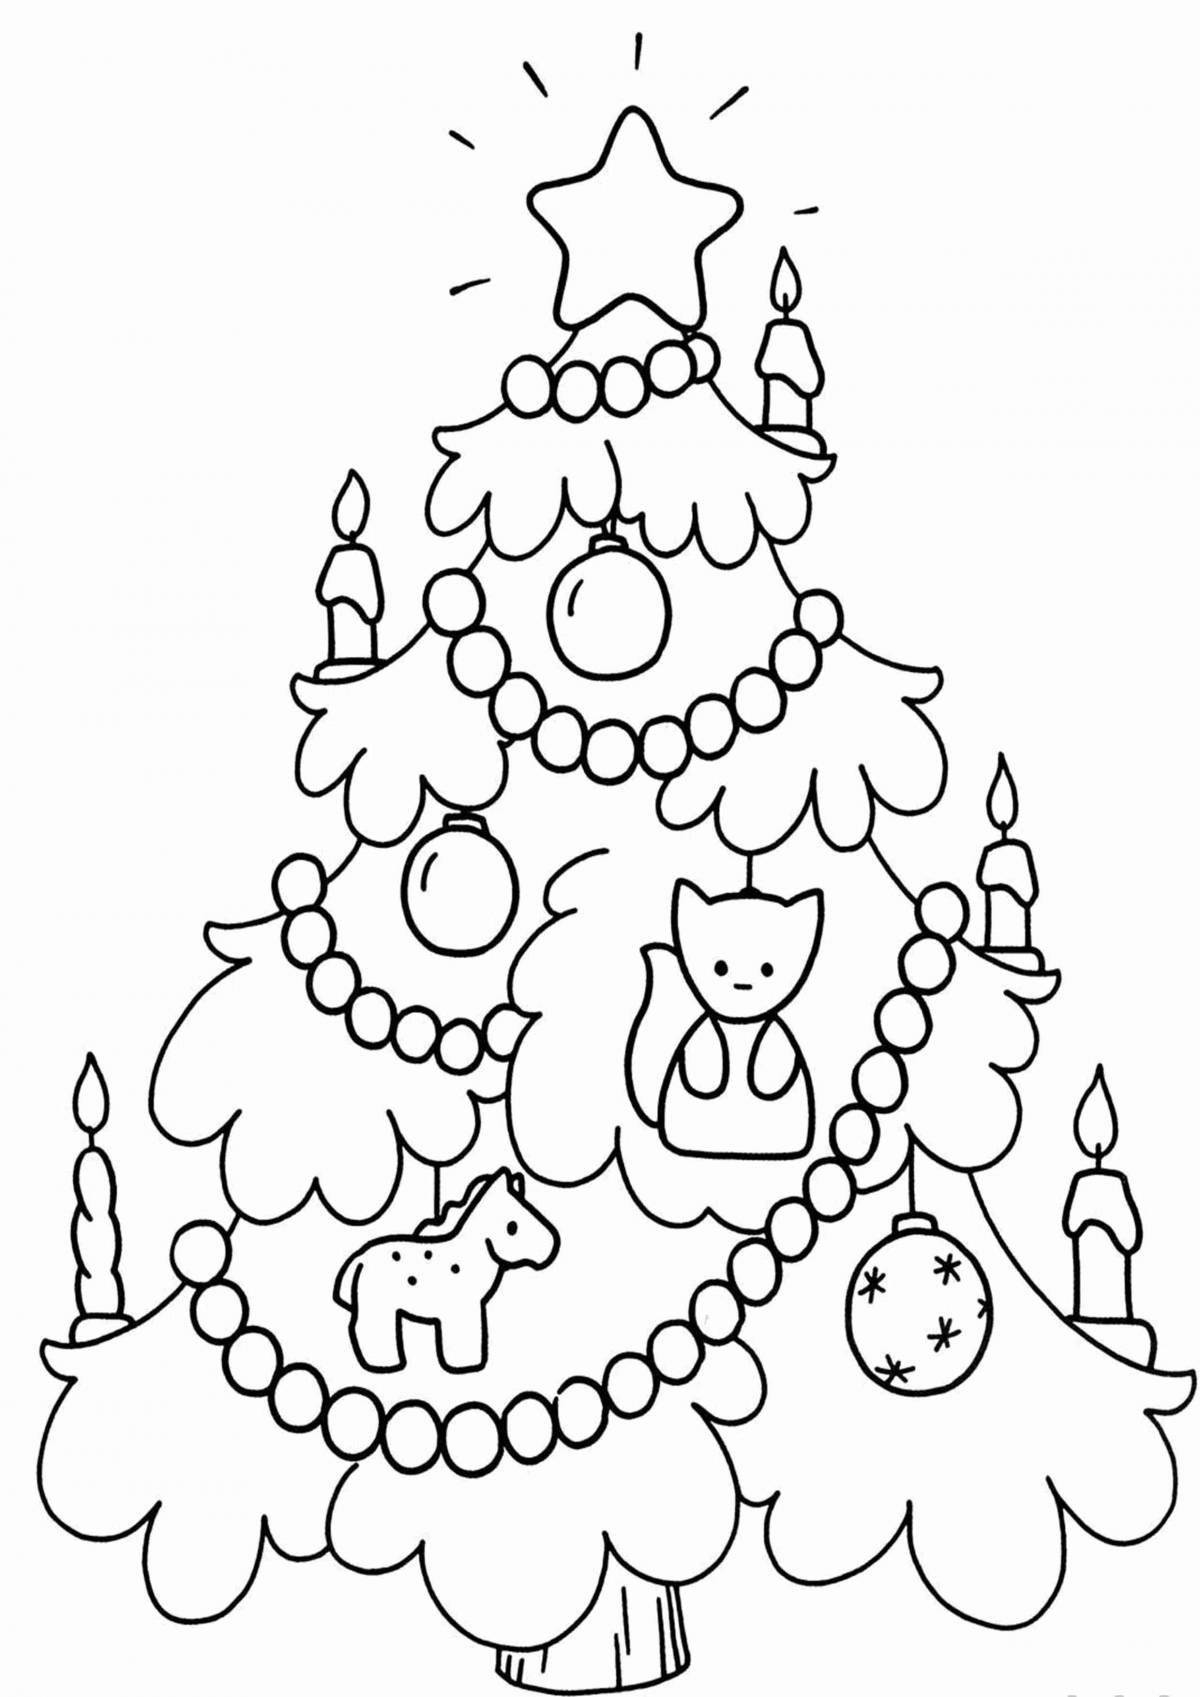 Christmas tree coloring page with colored splashes for girls